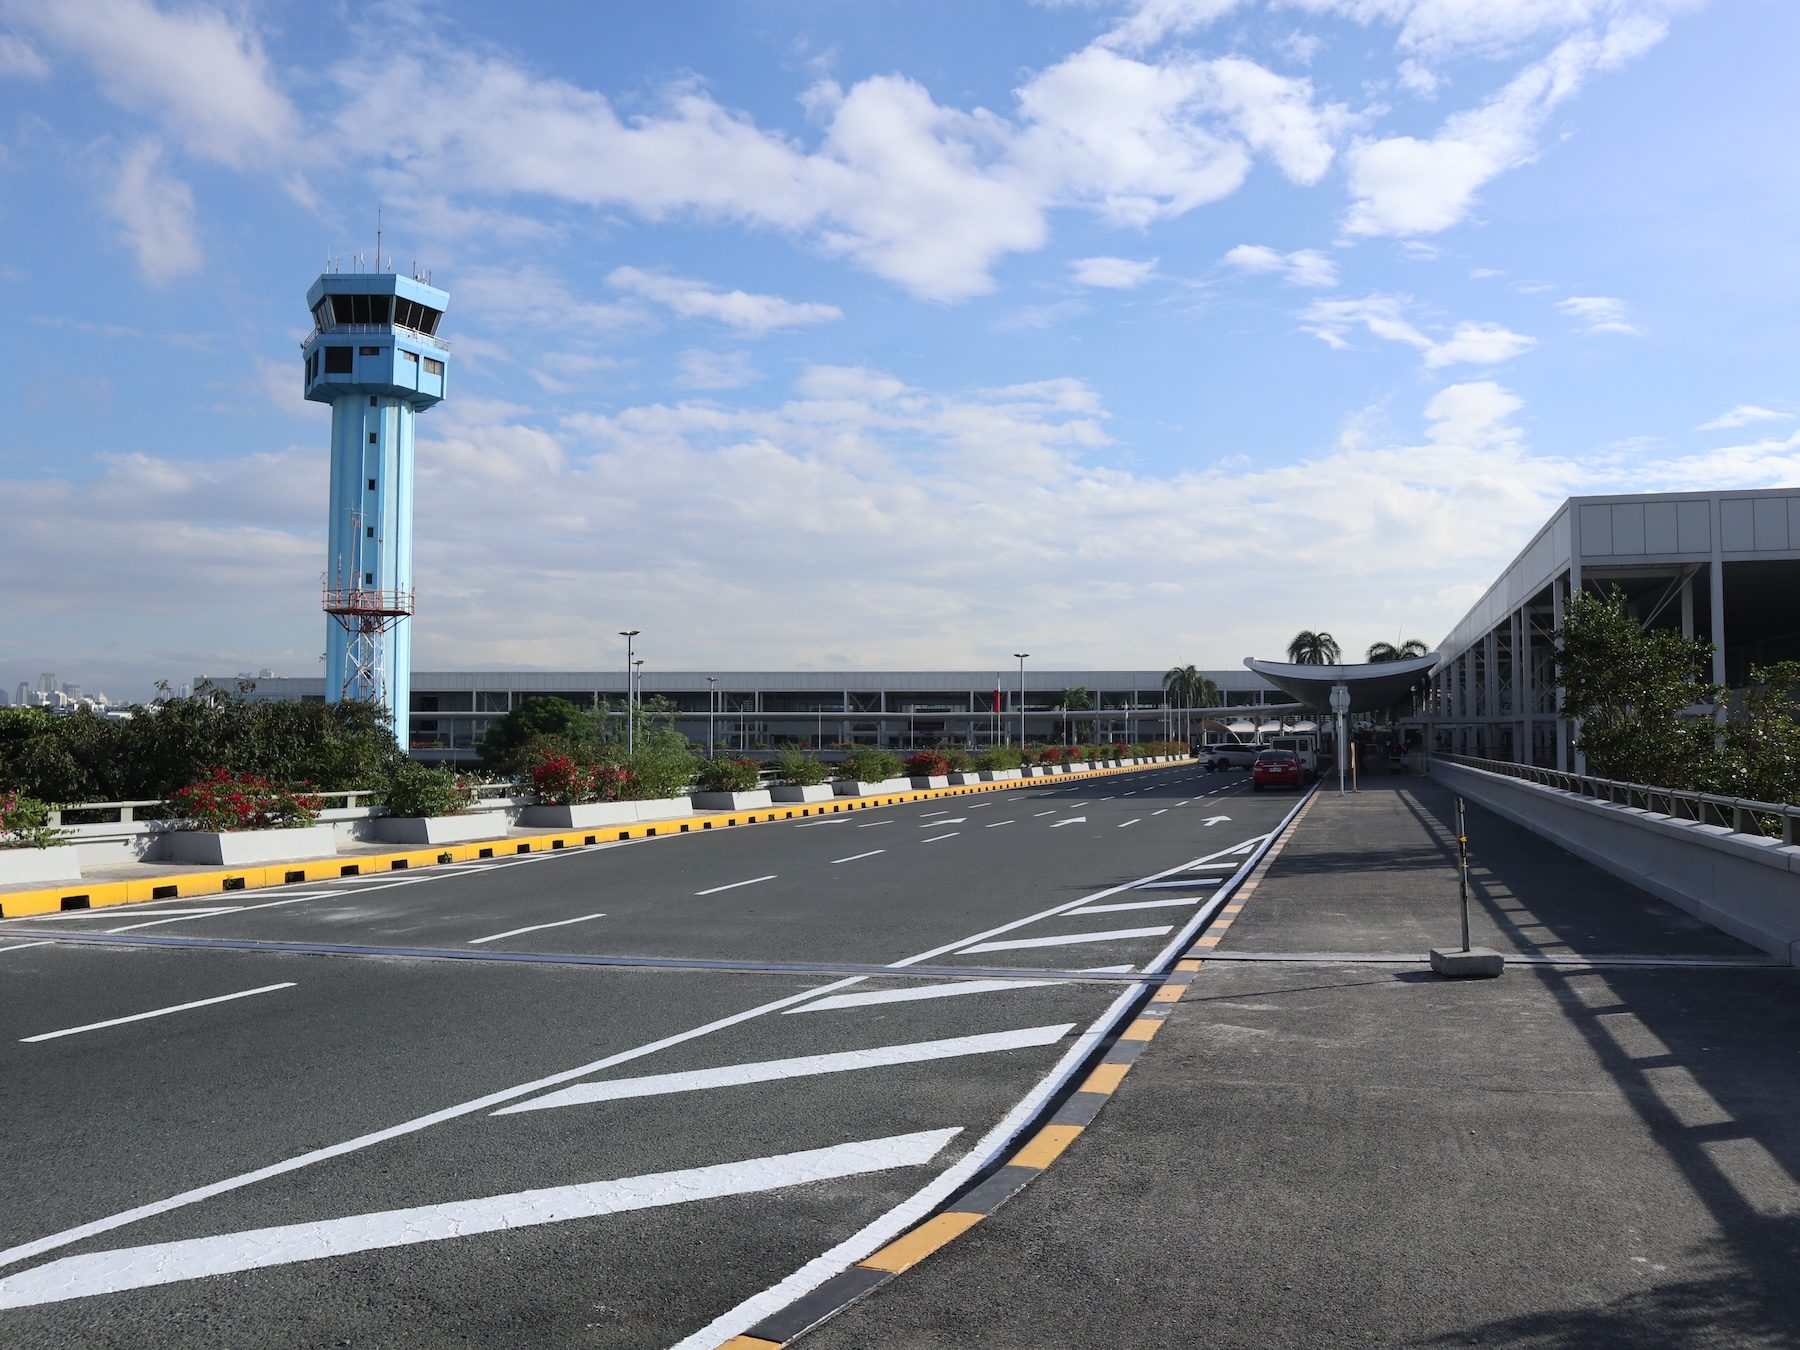 Philippine airports under heightened security alert over bomb threats – CAAP